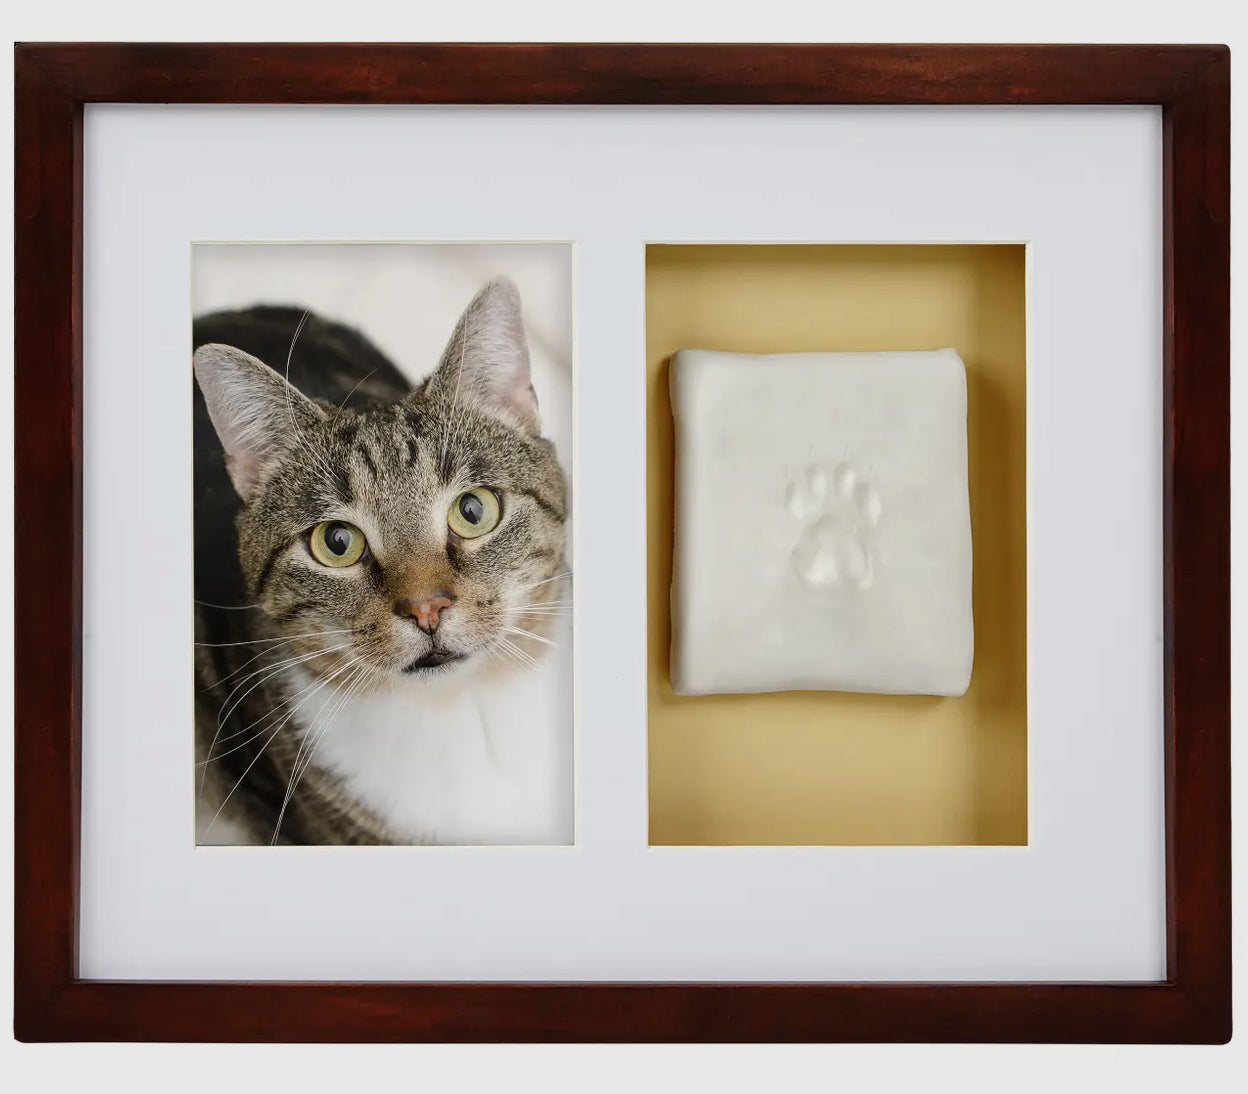 Pet Wall Frame and Impression Kit